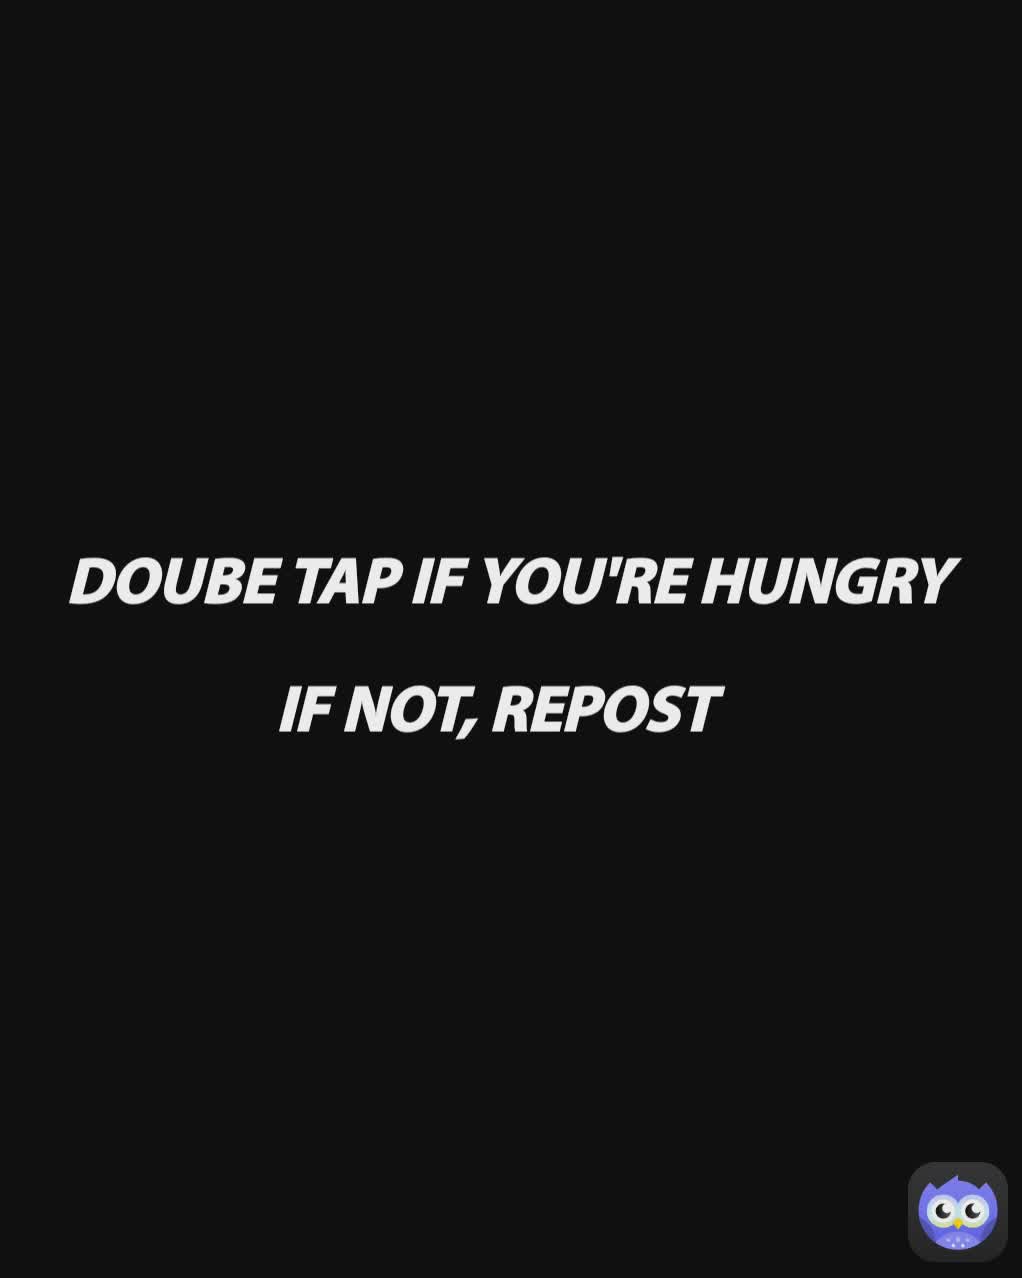 DOUBE TAP IF YOU'RE HUNGRY

IF NOT, REPOST